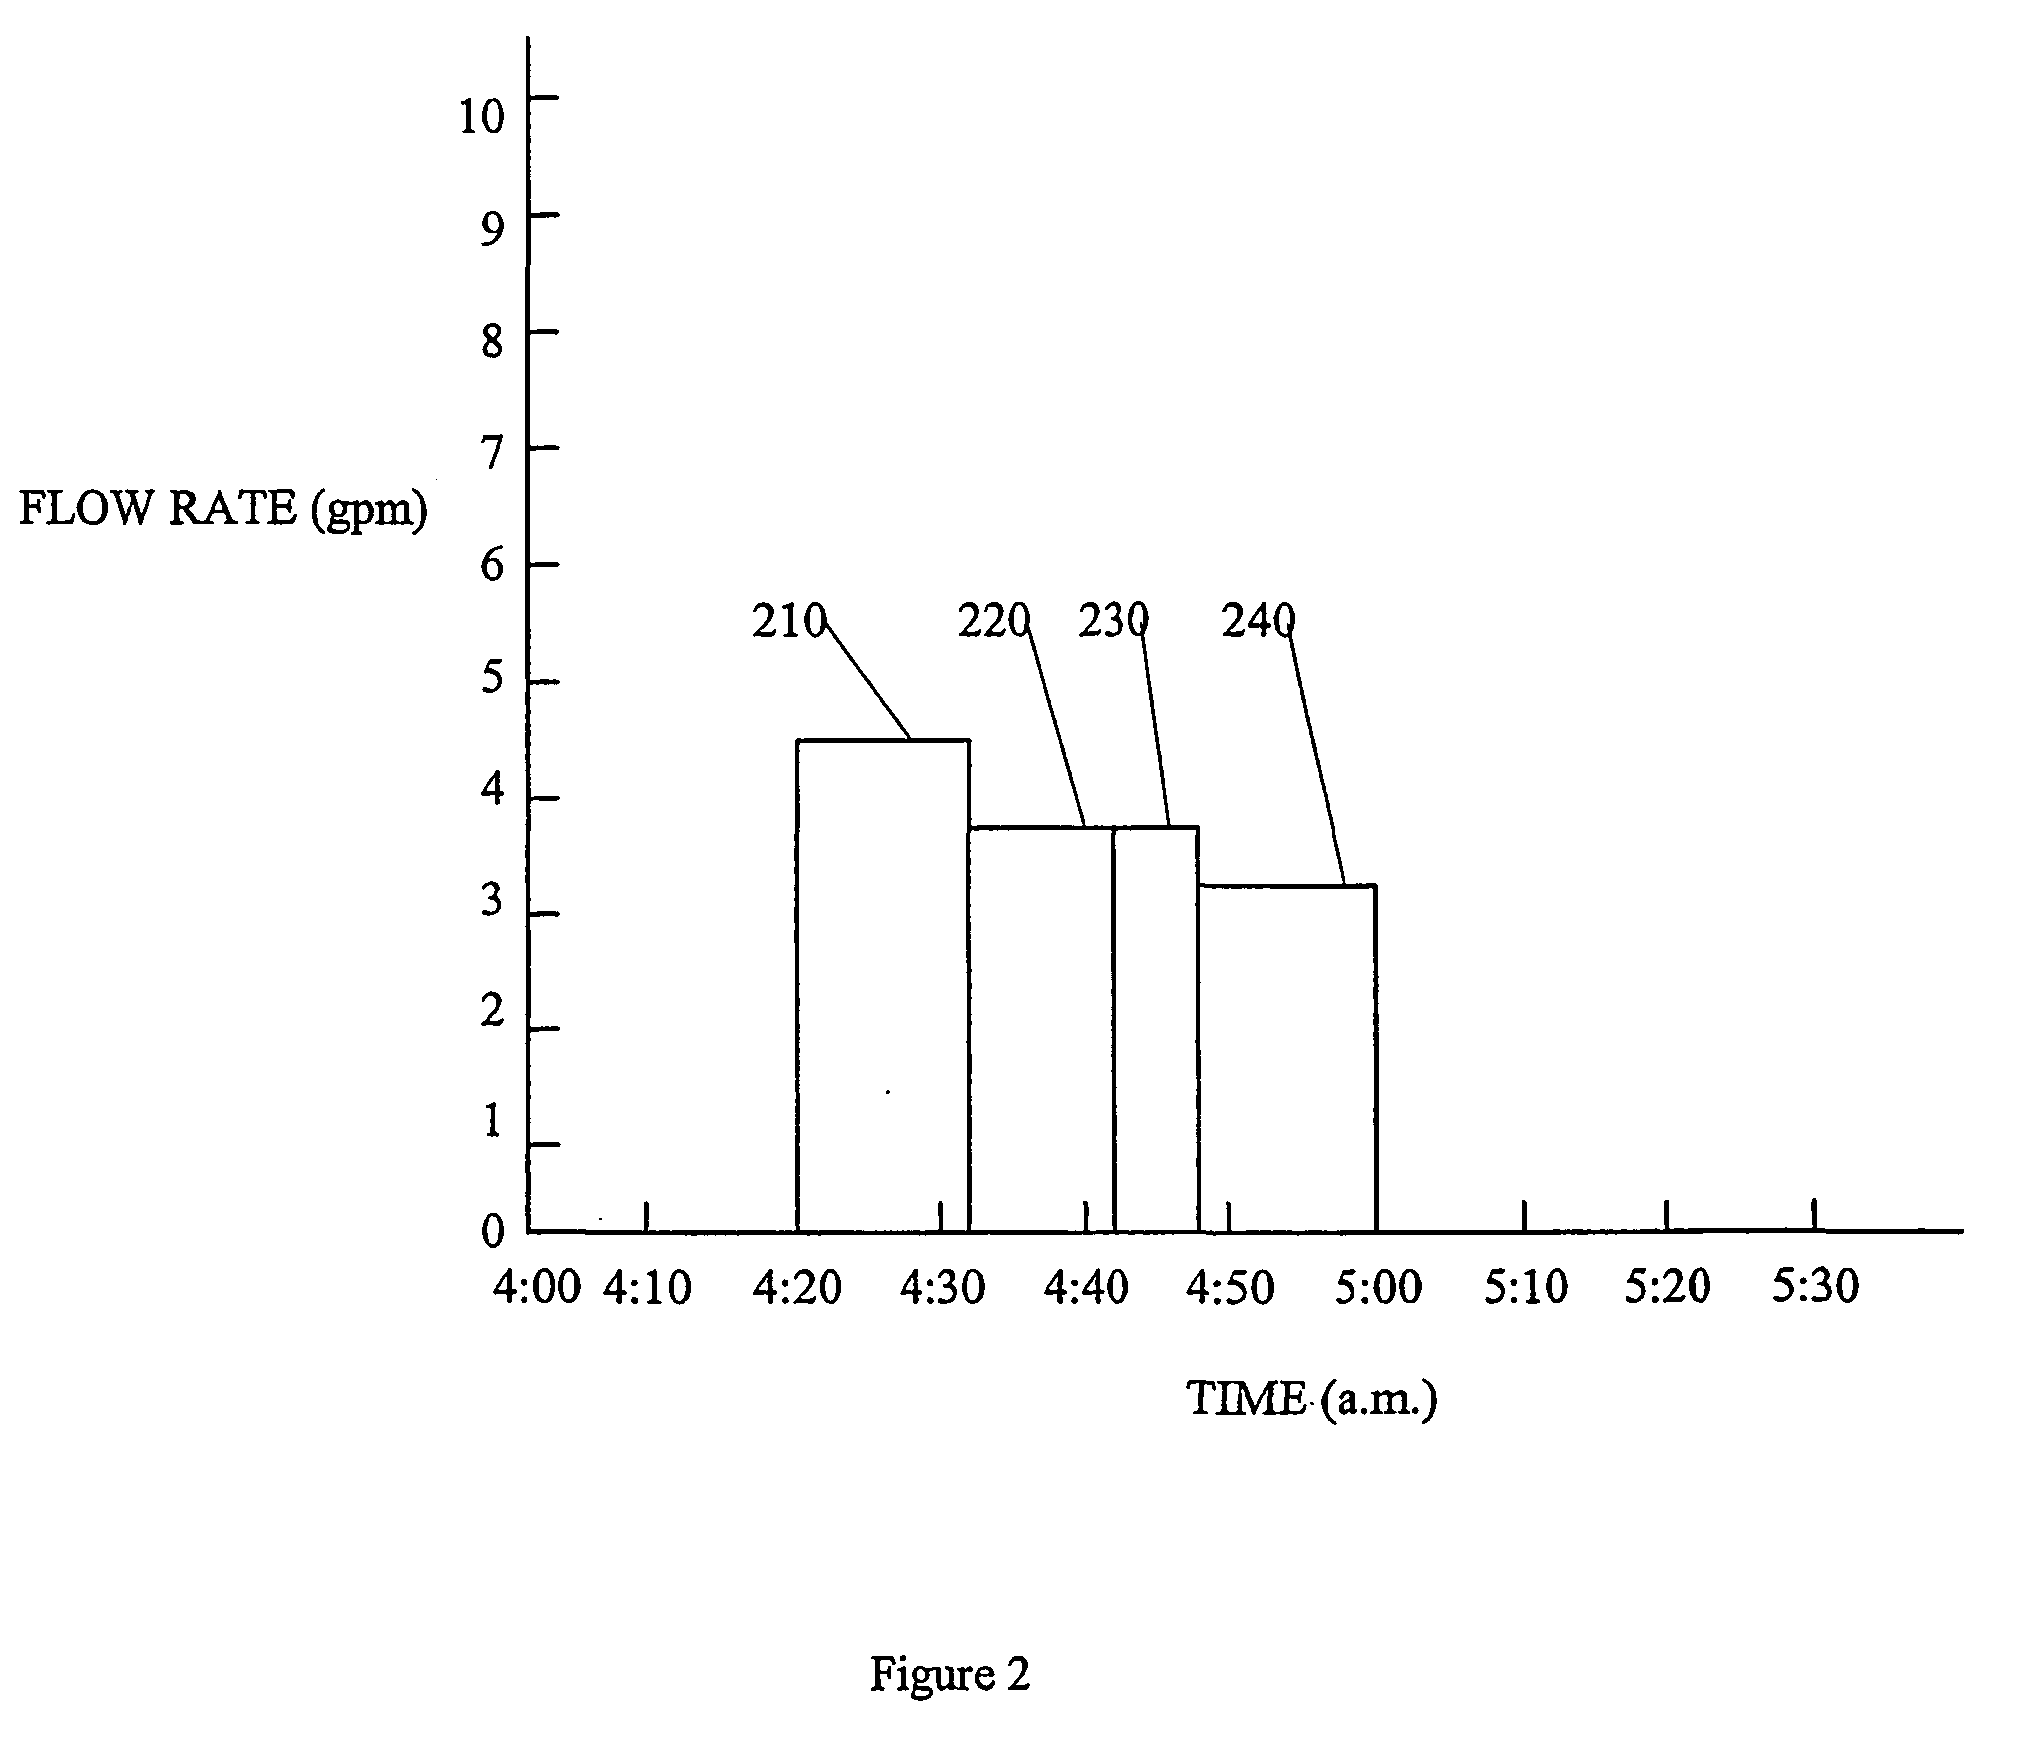 Methods and apparatus for using water use signatures and water pressure in improving water use efficiency